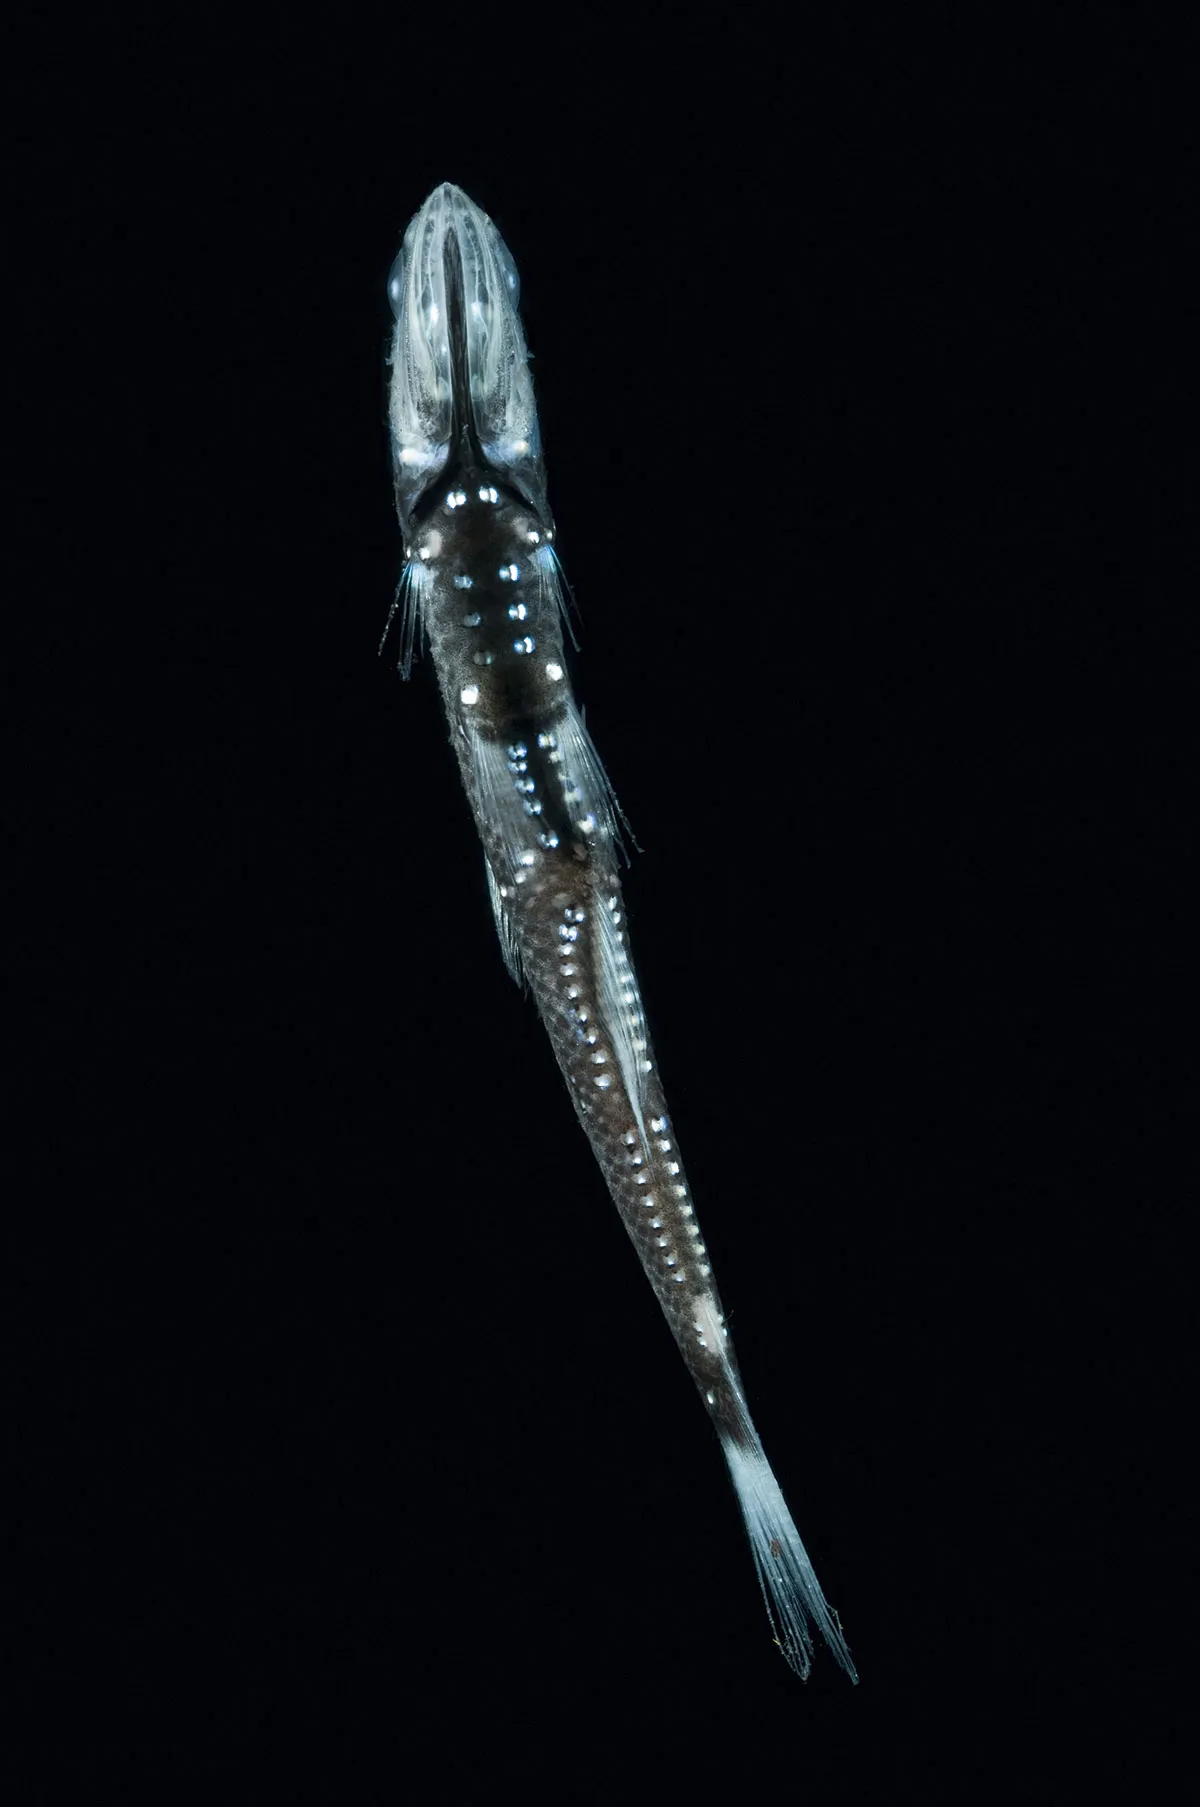 A lanternfish, pictured from below. It has a line of small light organs on its underside